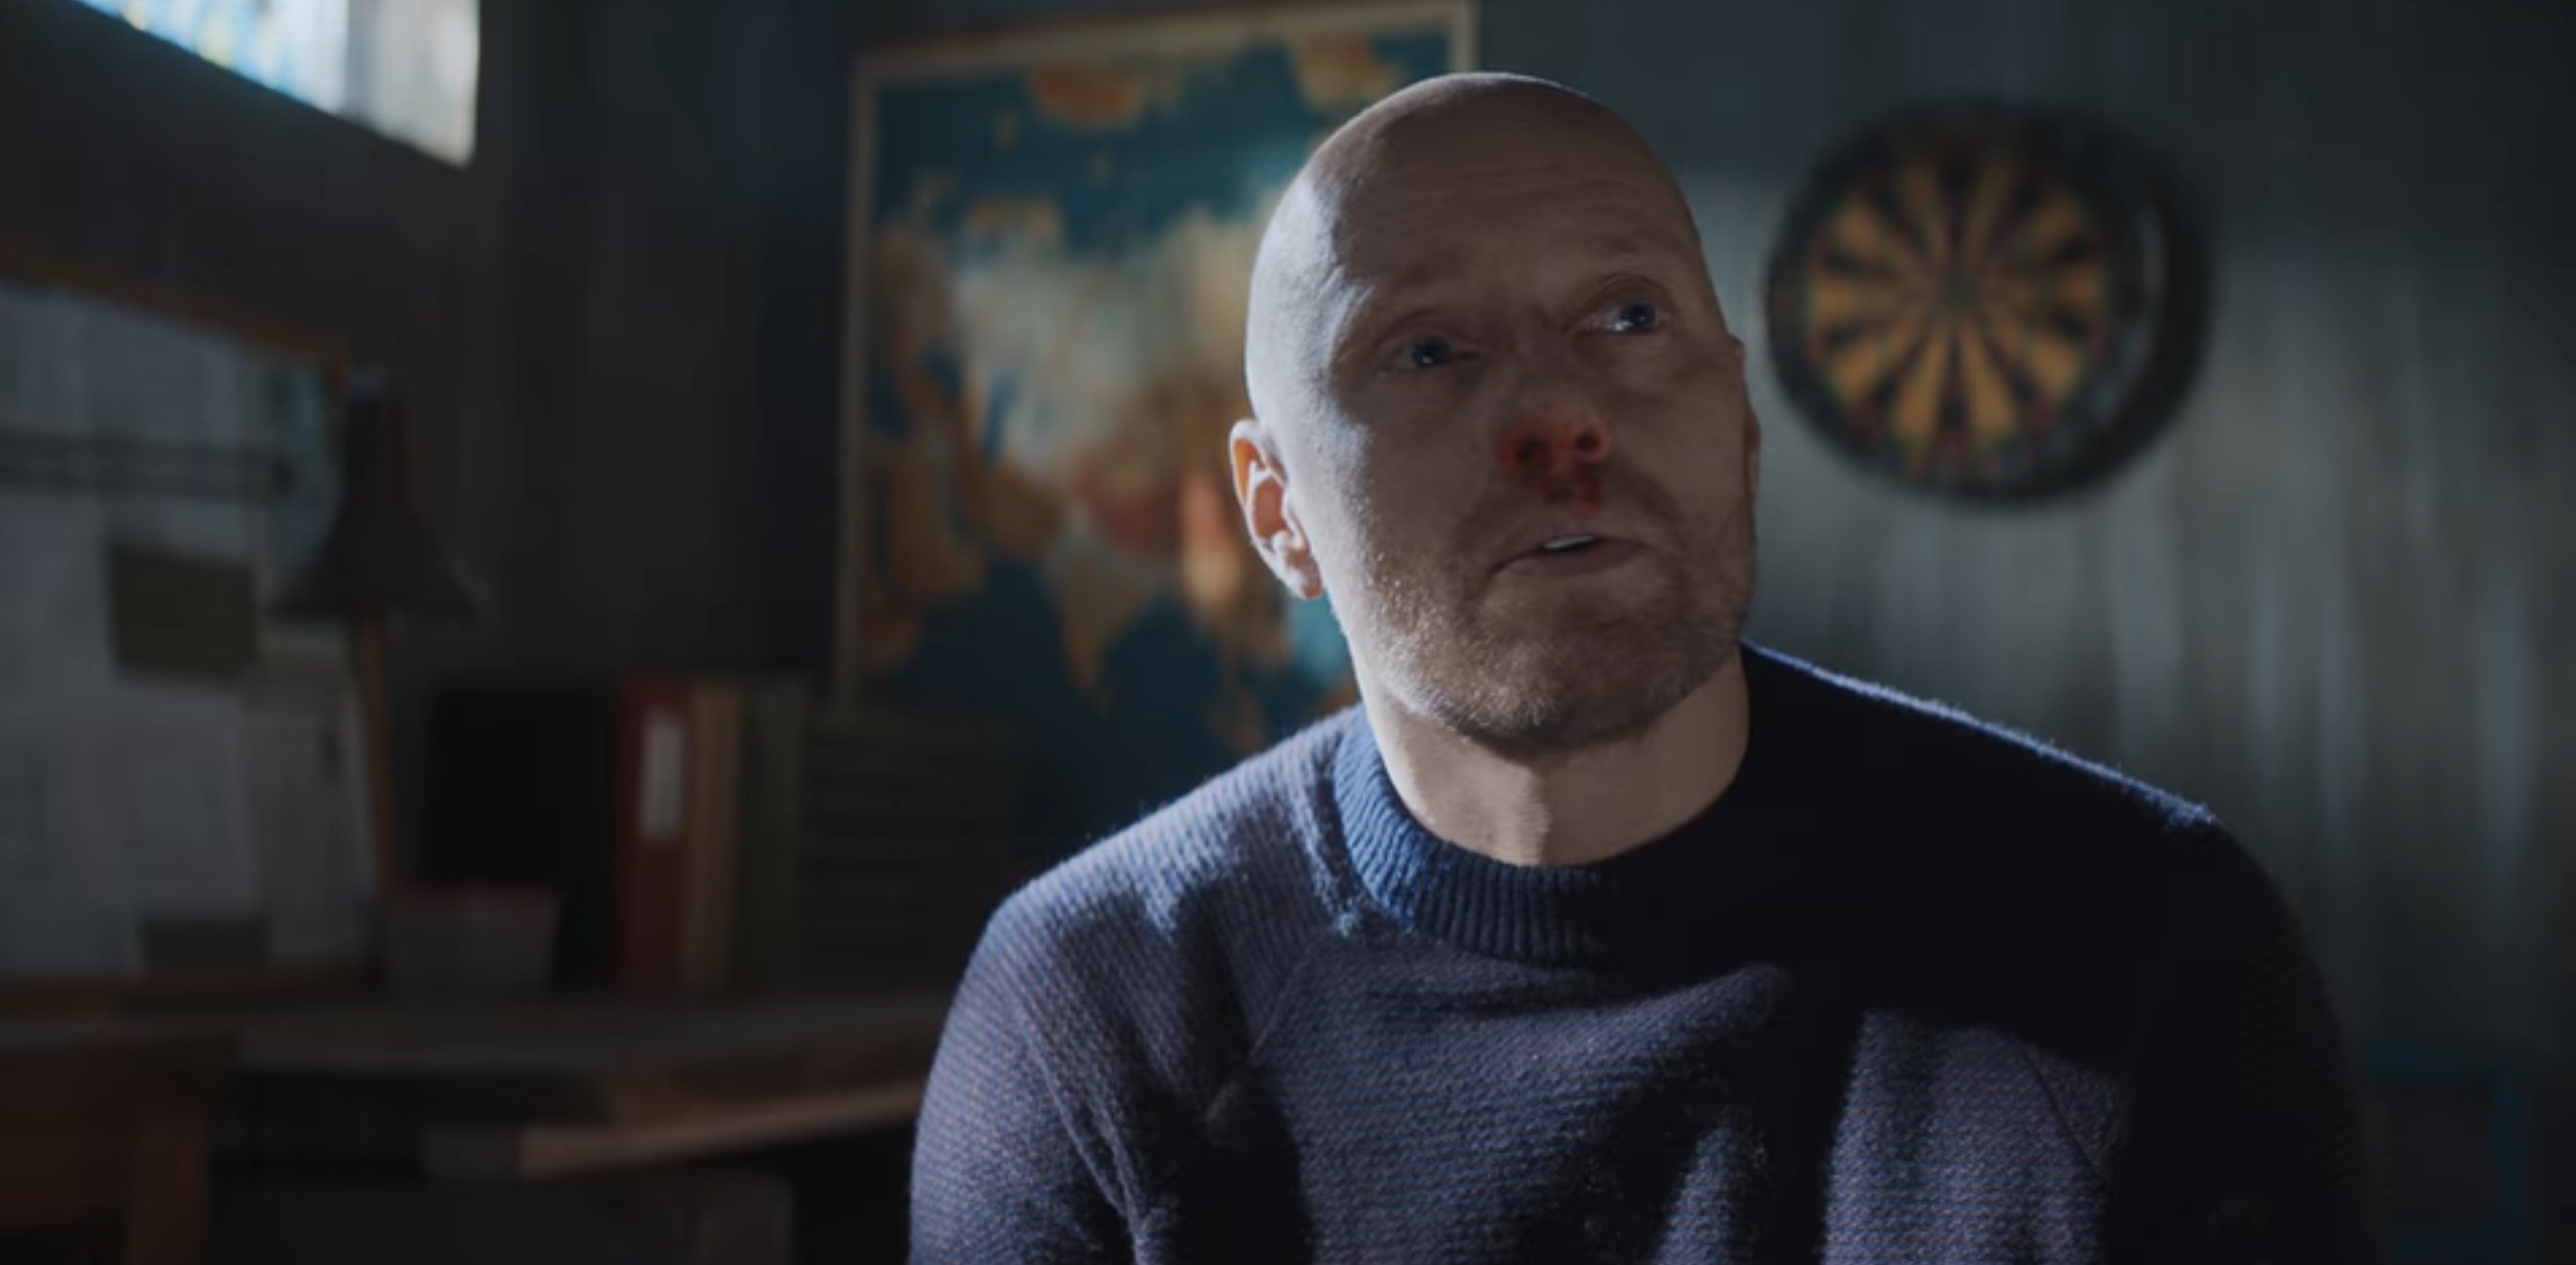 The Trip Cast on Netflix (I onde dager) - Aksel Hennie as Lars